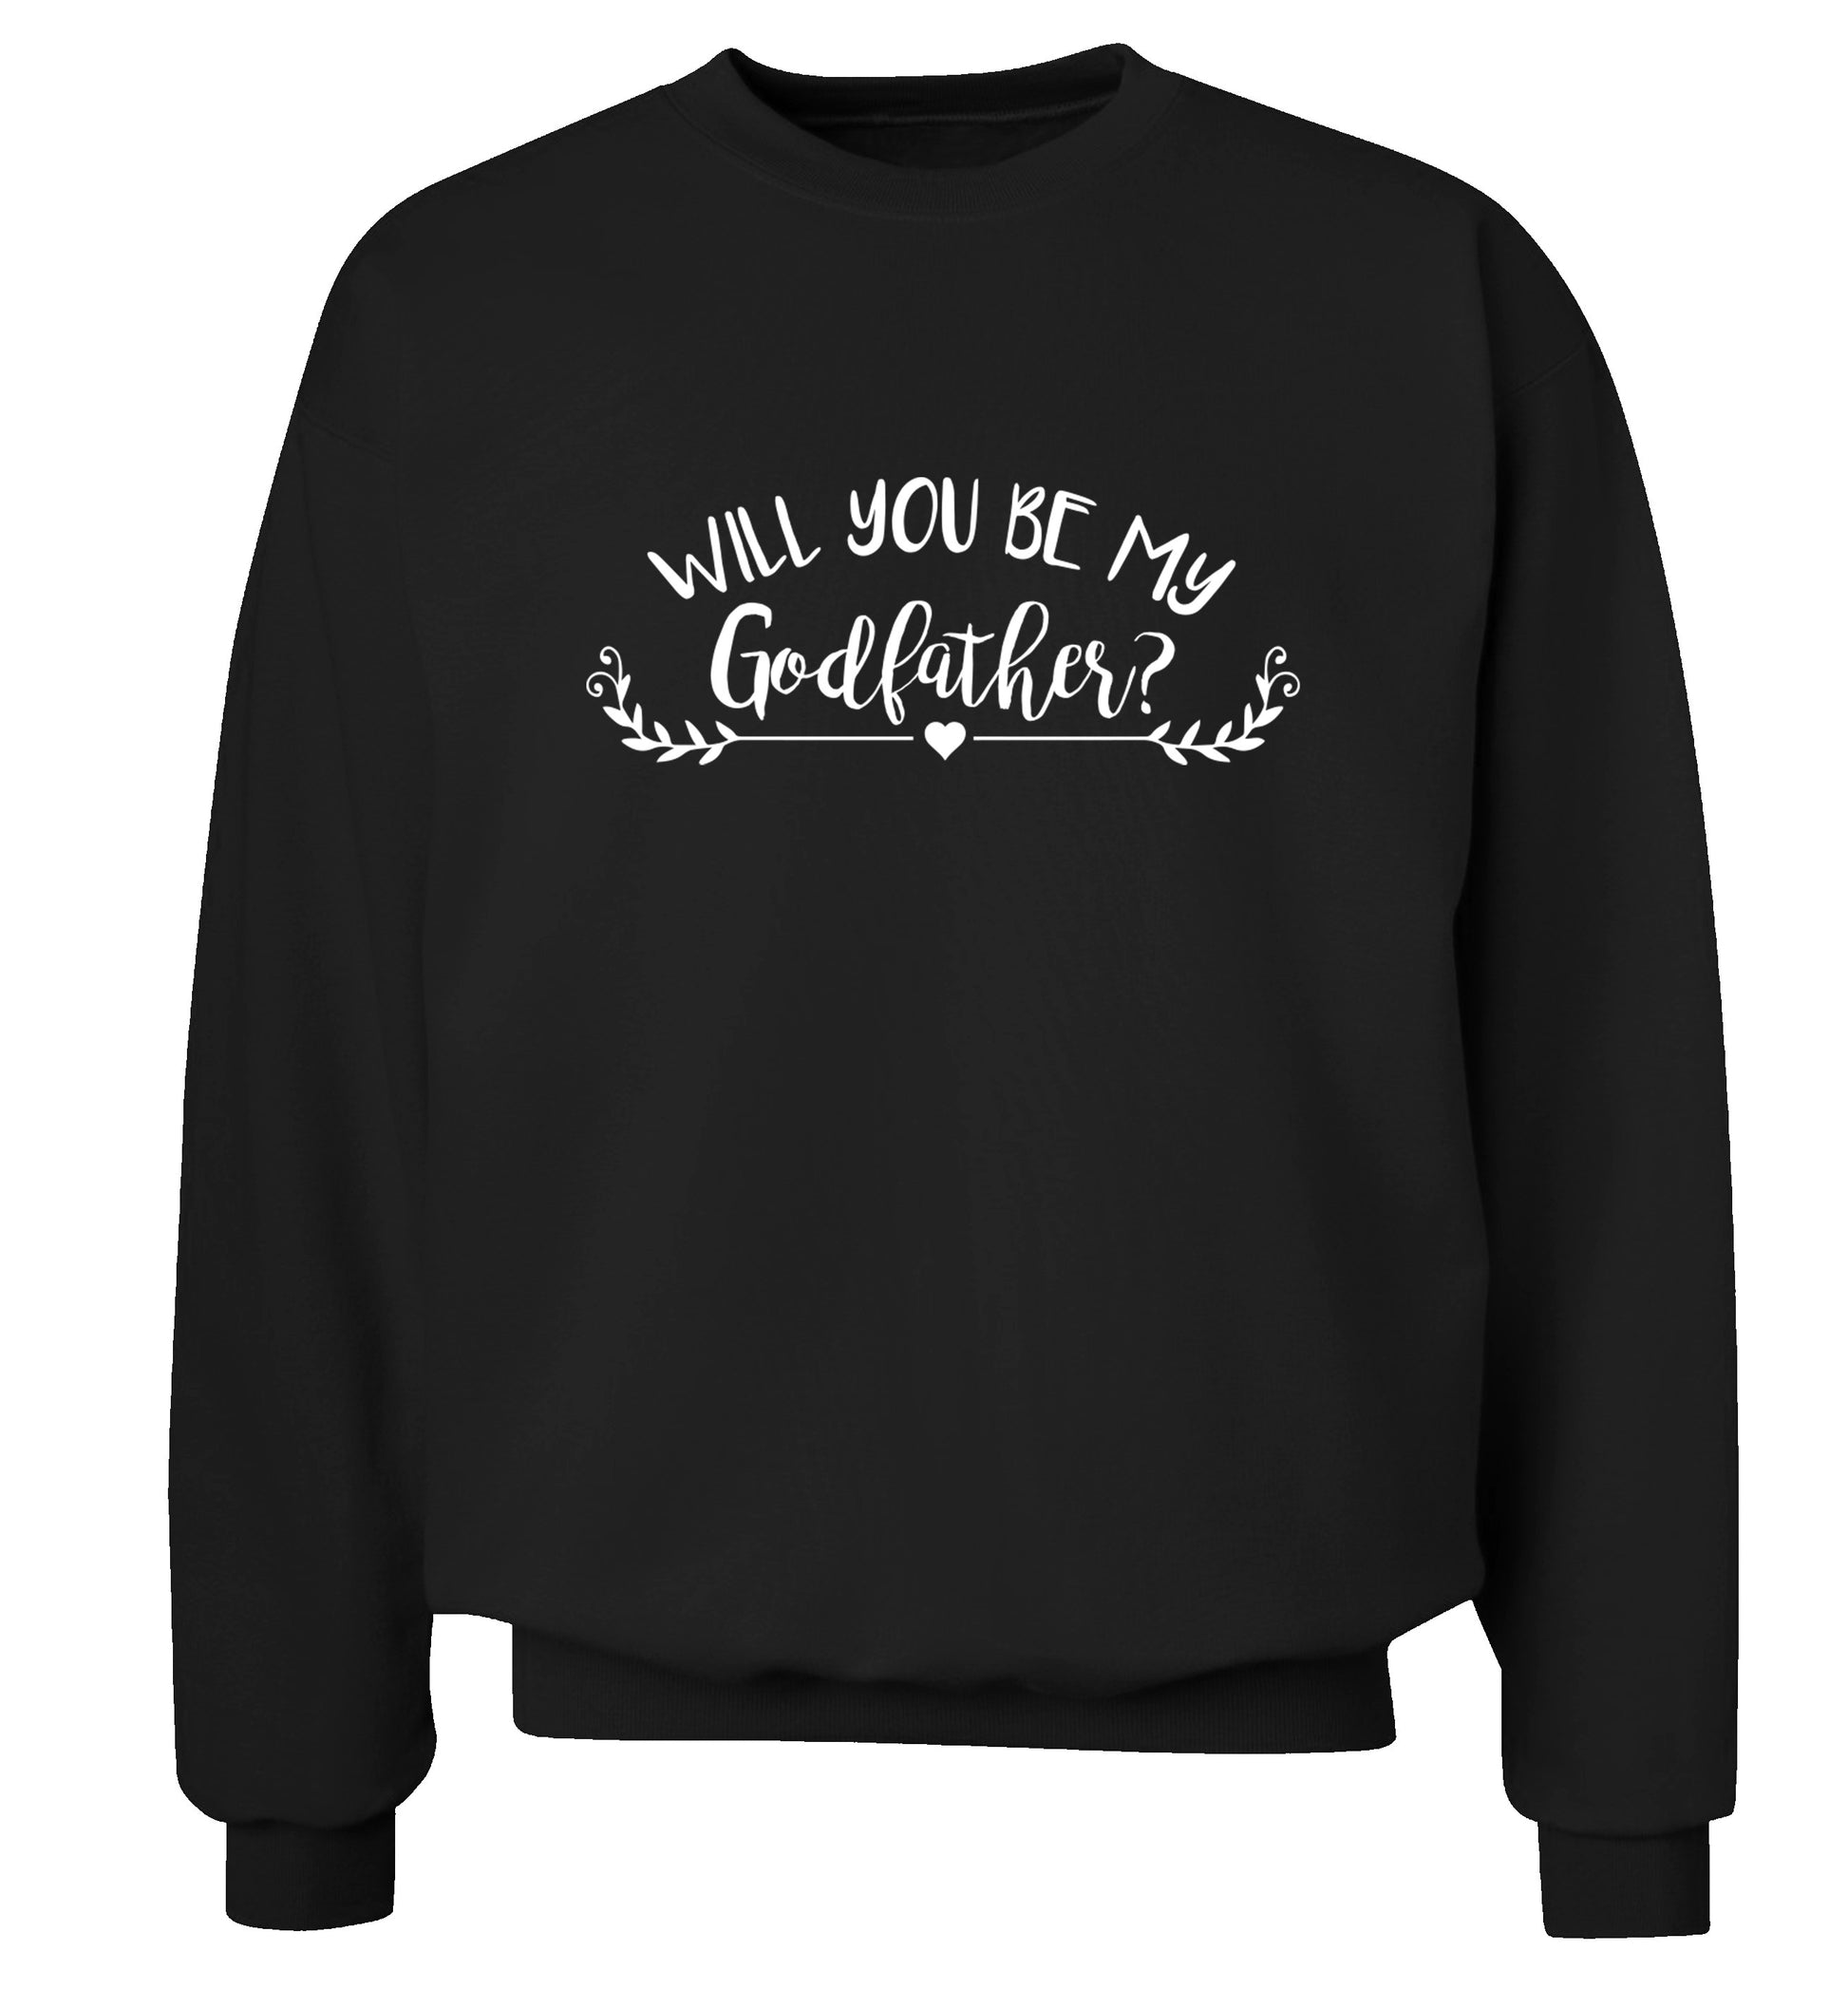 Will you be my godfather? Adult's unisex black Sweater 2XL